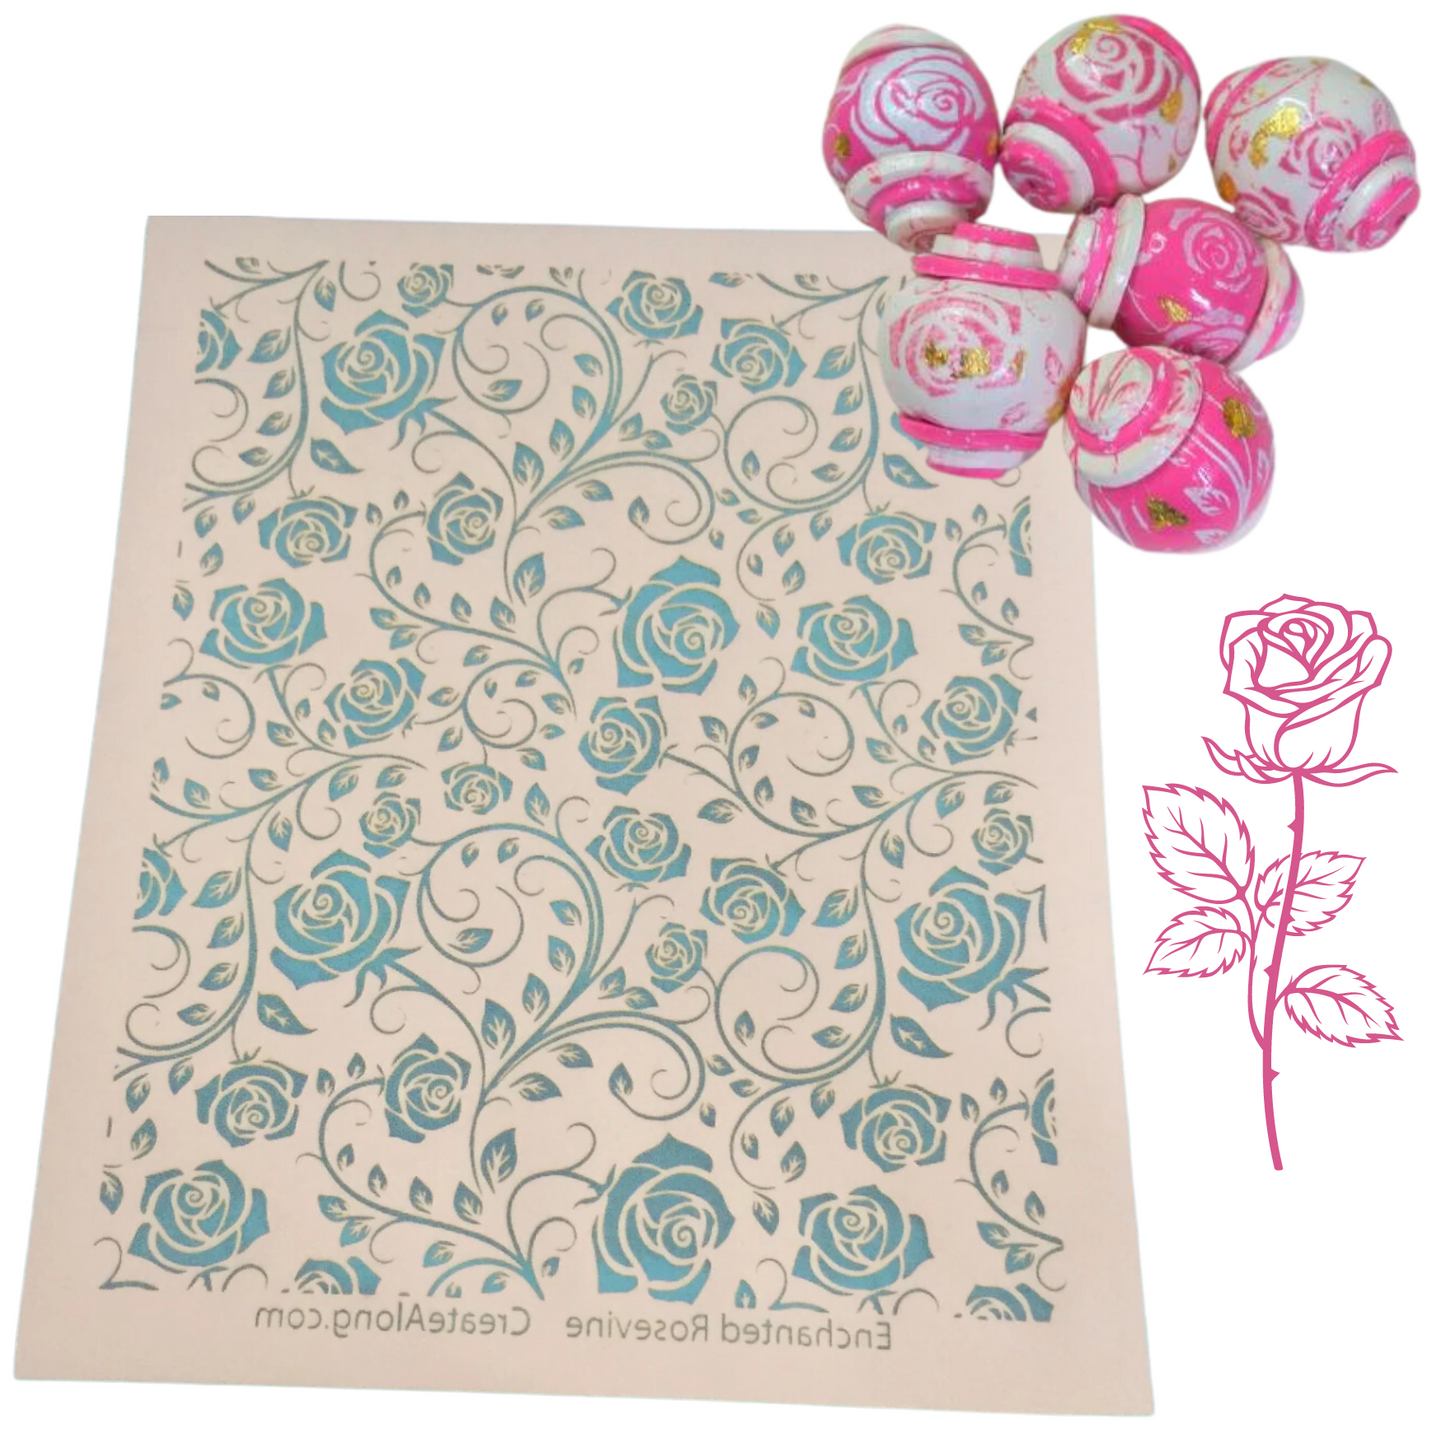 Silkscreen Enchanted Rosevine Stencil Crafting, Polymer Clay, Art Jewelry, and Mixed Media